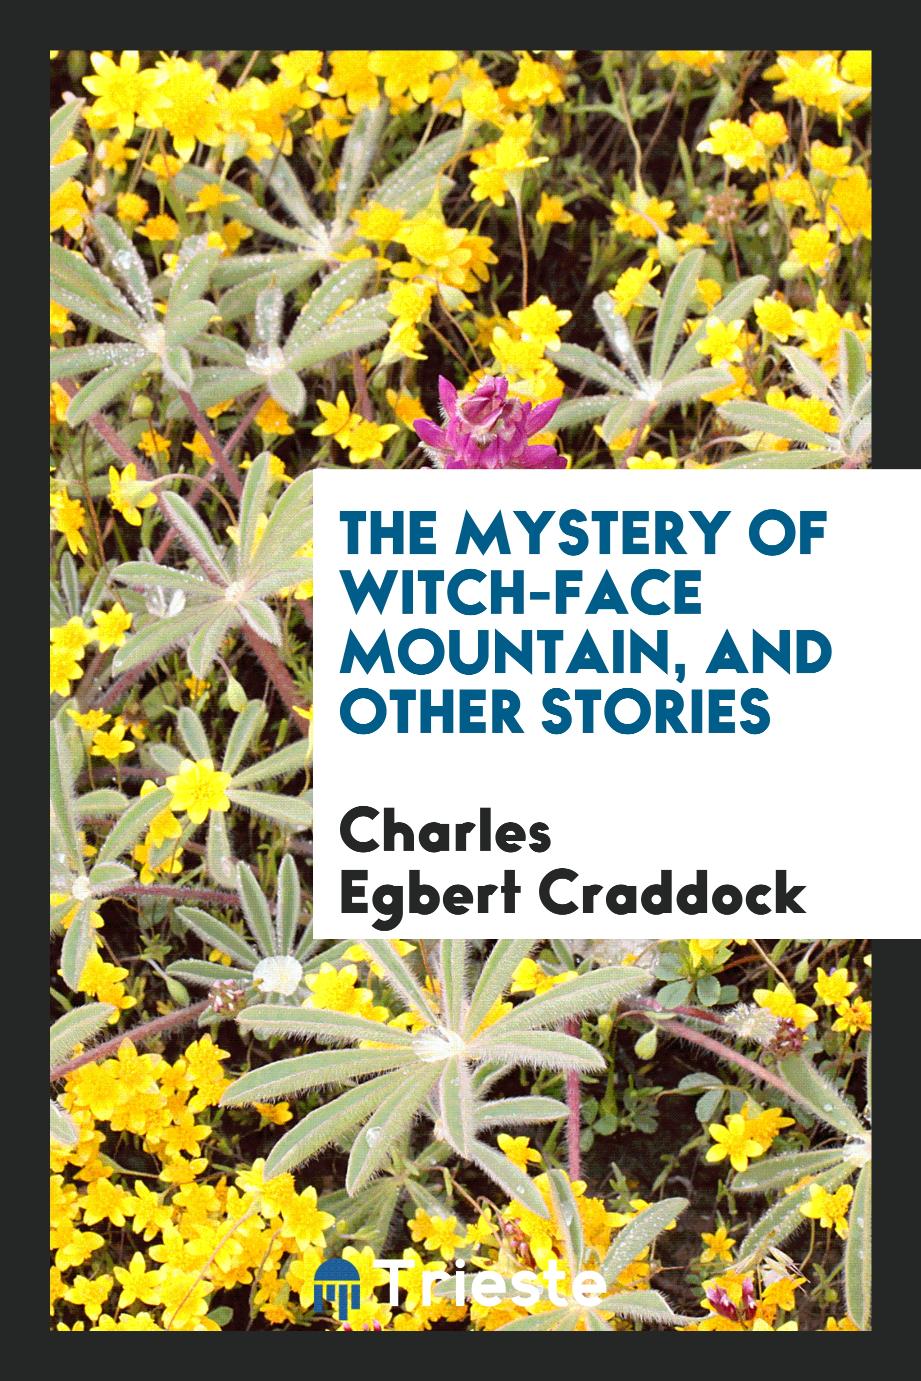 The mystery of Witch-Face Mountain, and other stories